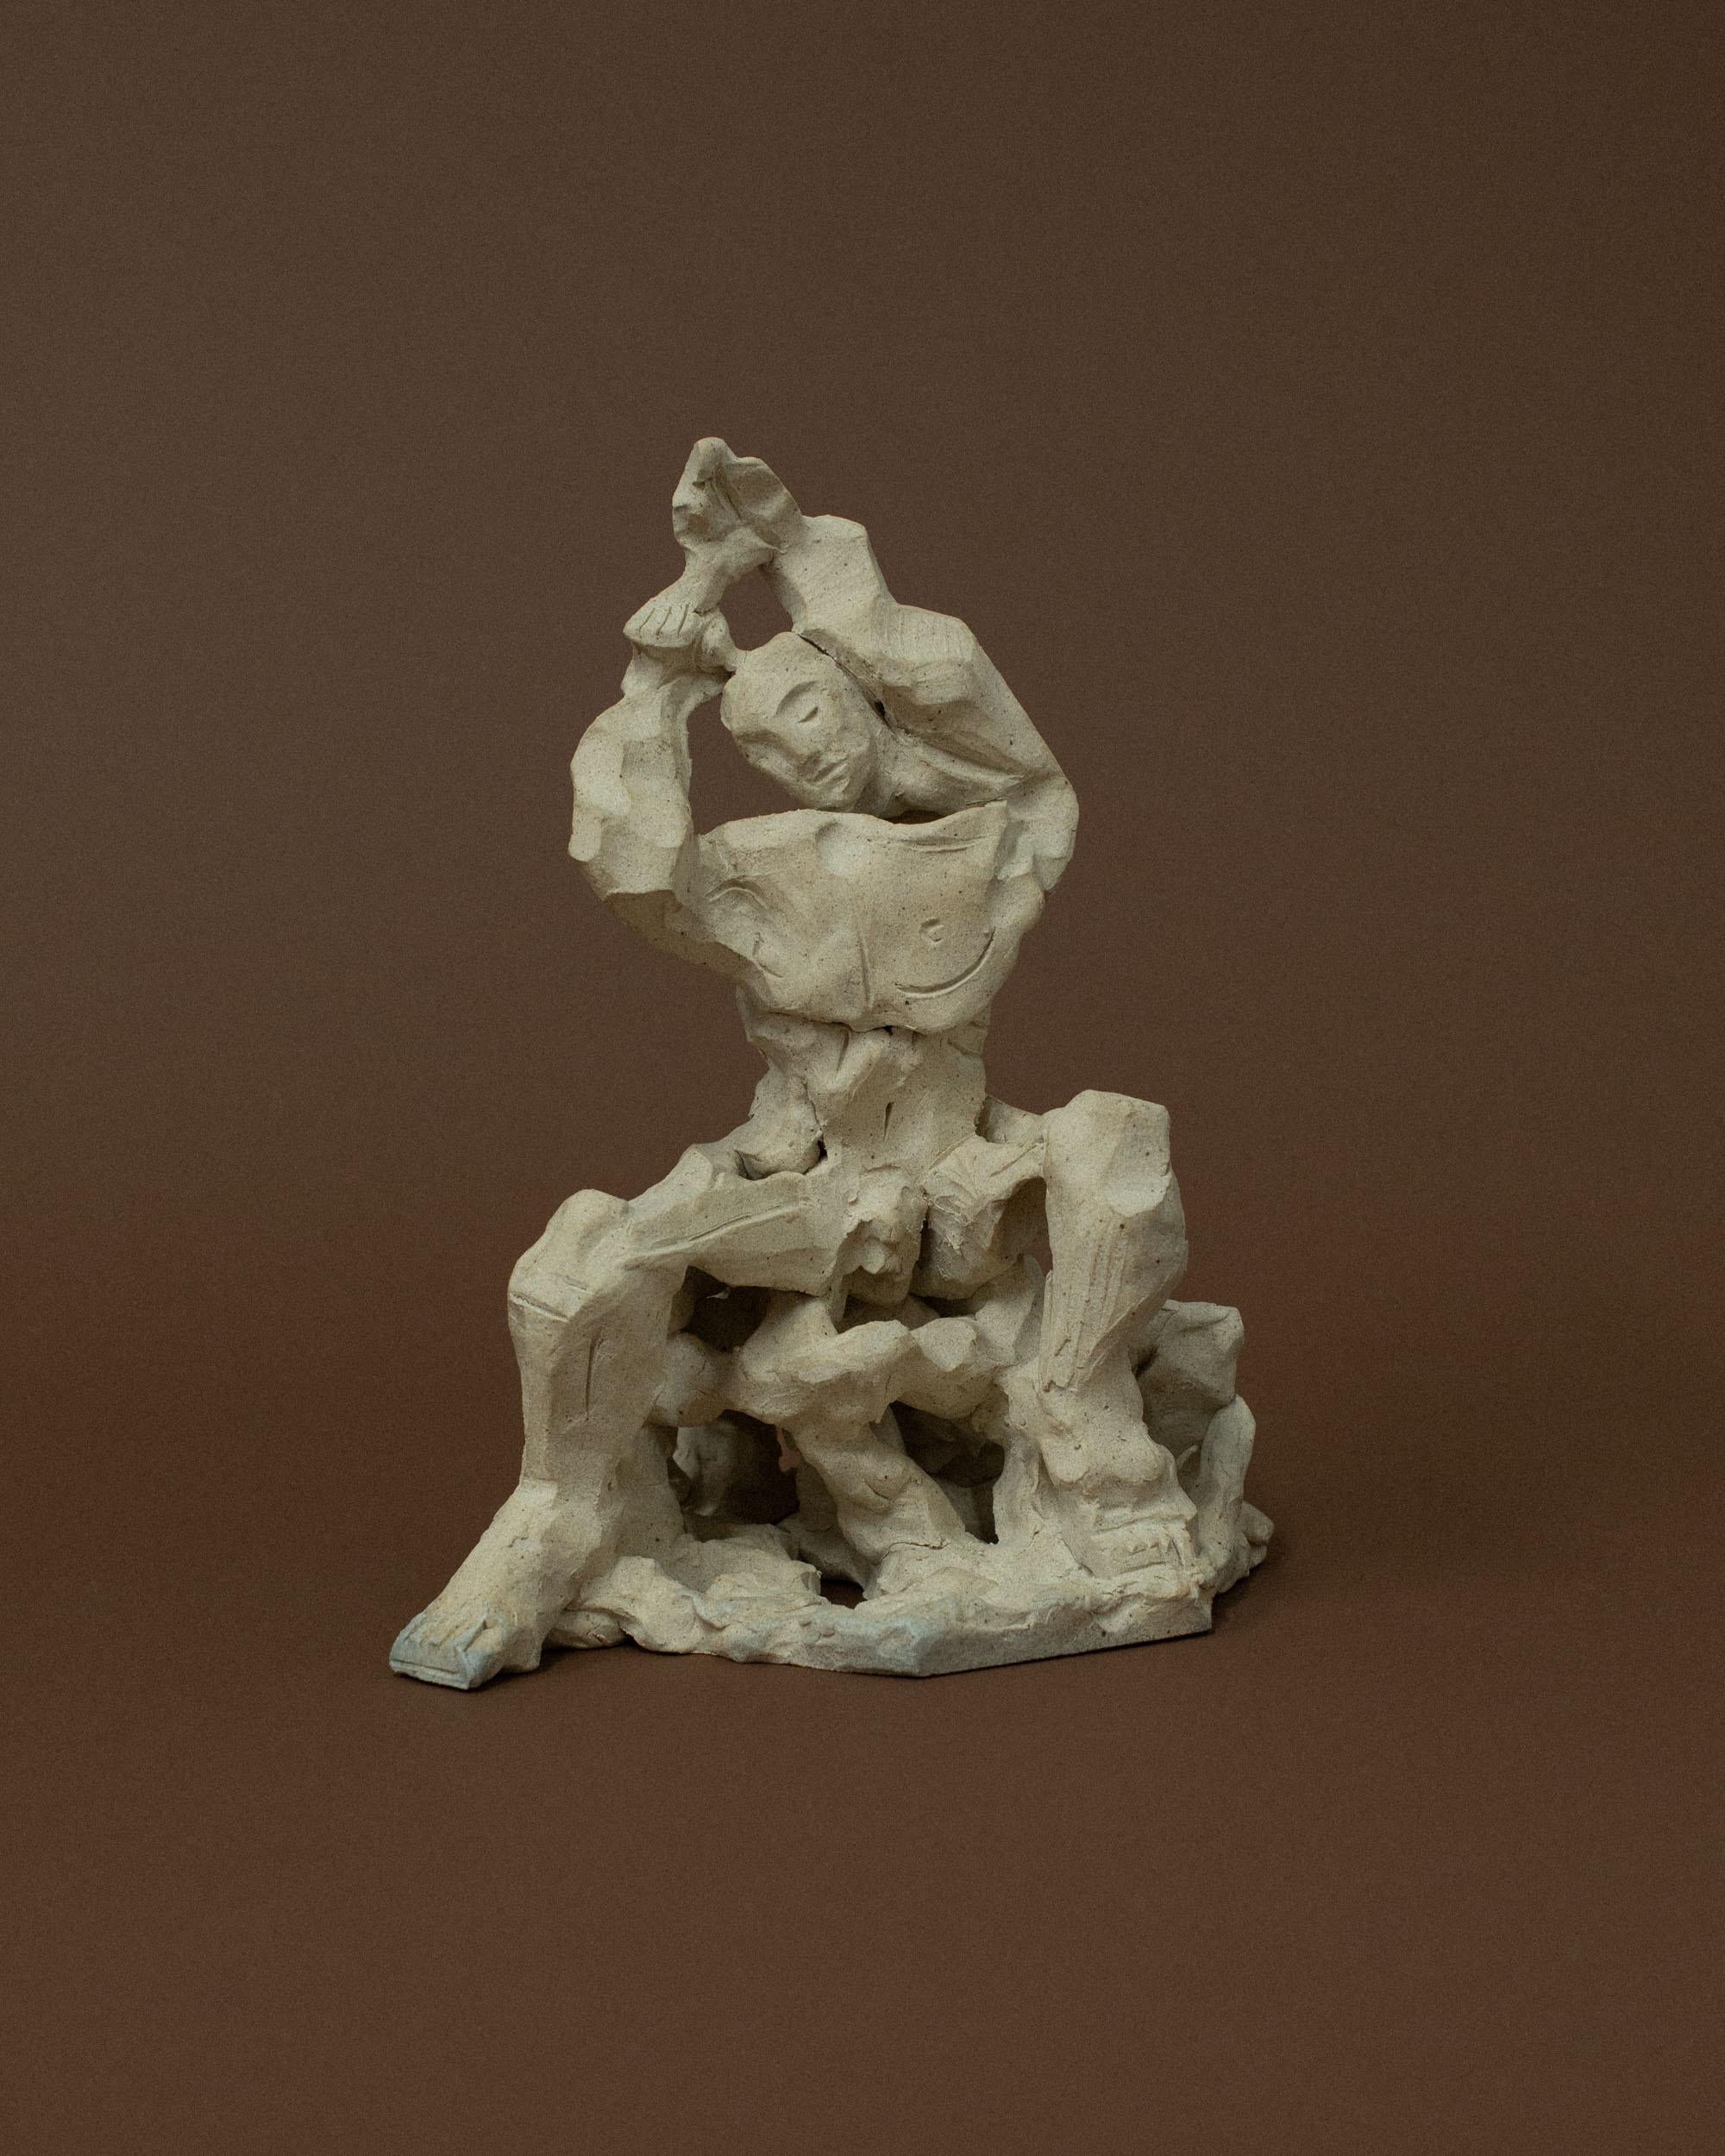 Natural Seated Figure by Common Body
Dimensions: W 28 x D 23 x H 32 cm
Materials: Natural Stoneware

Common body is a sculpture and interior object studio founded by nathaniel kyung smith, an artist whose passion lies in the intersection of art and